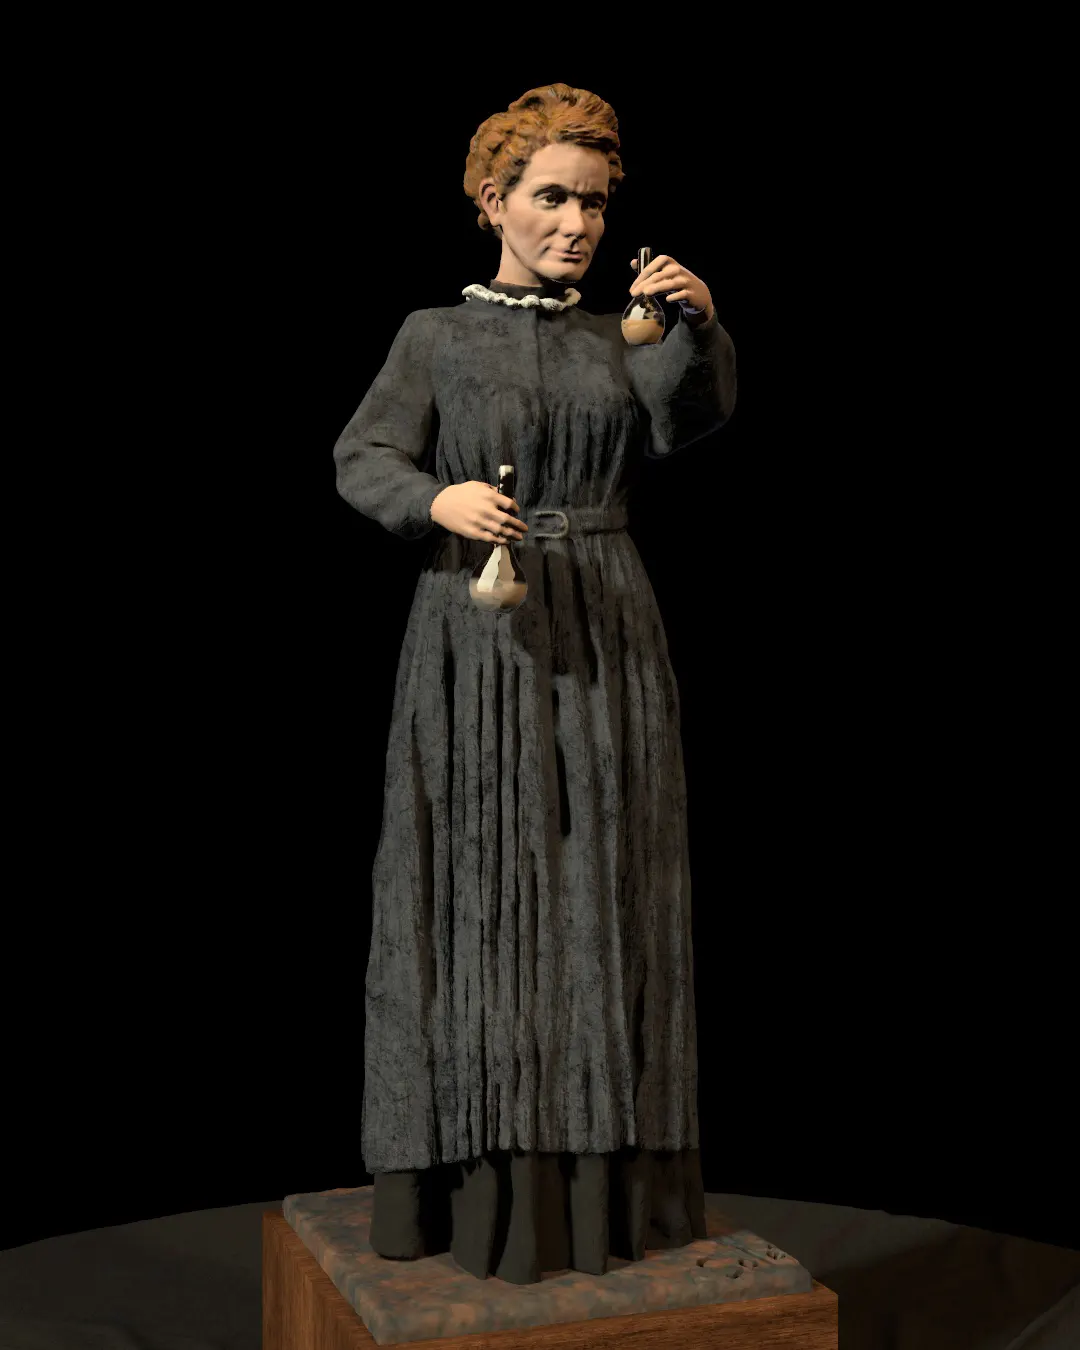 Marie-Curie-statue/Rendering-of-Marie-Curie-statue-modeled-by-Emil-Sole-2.webp